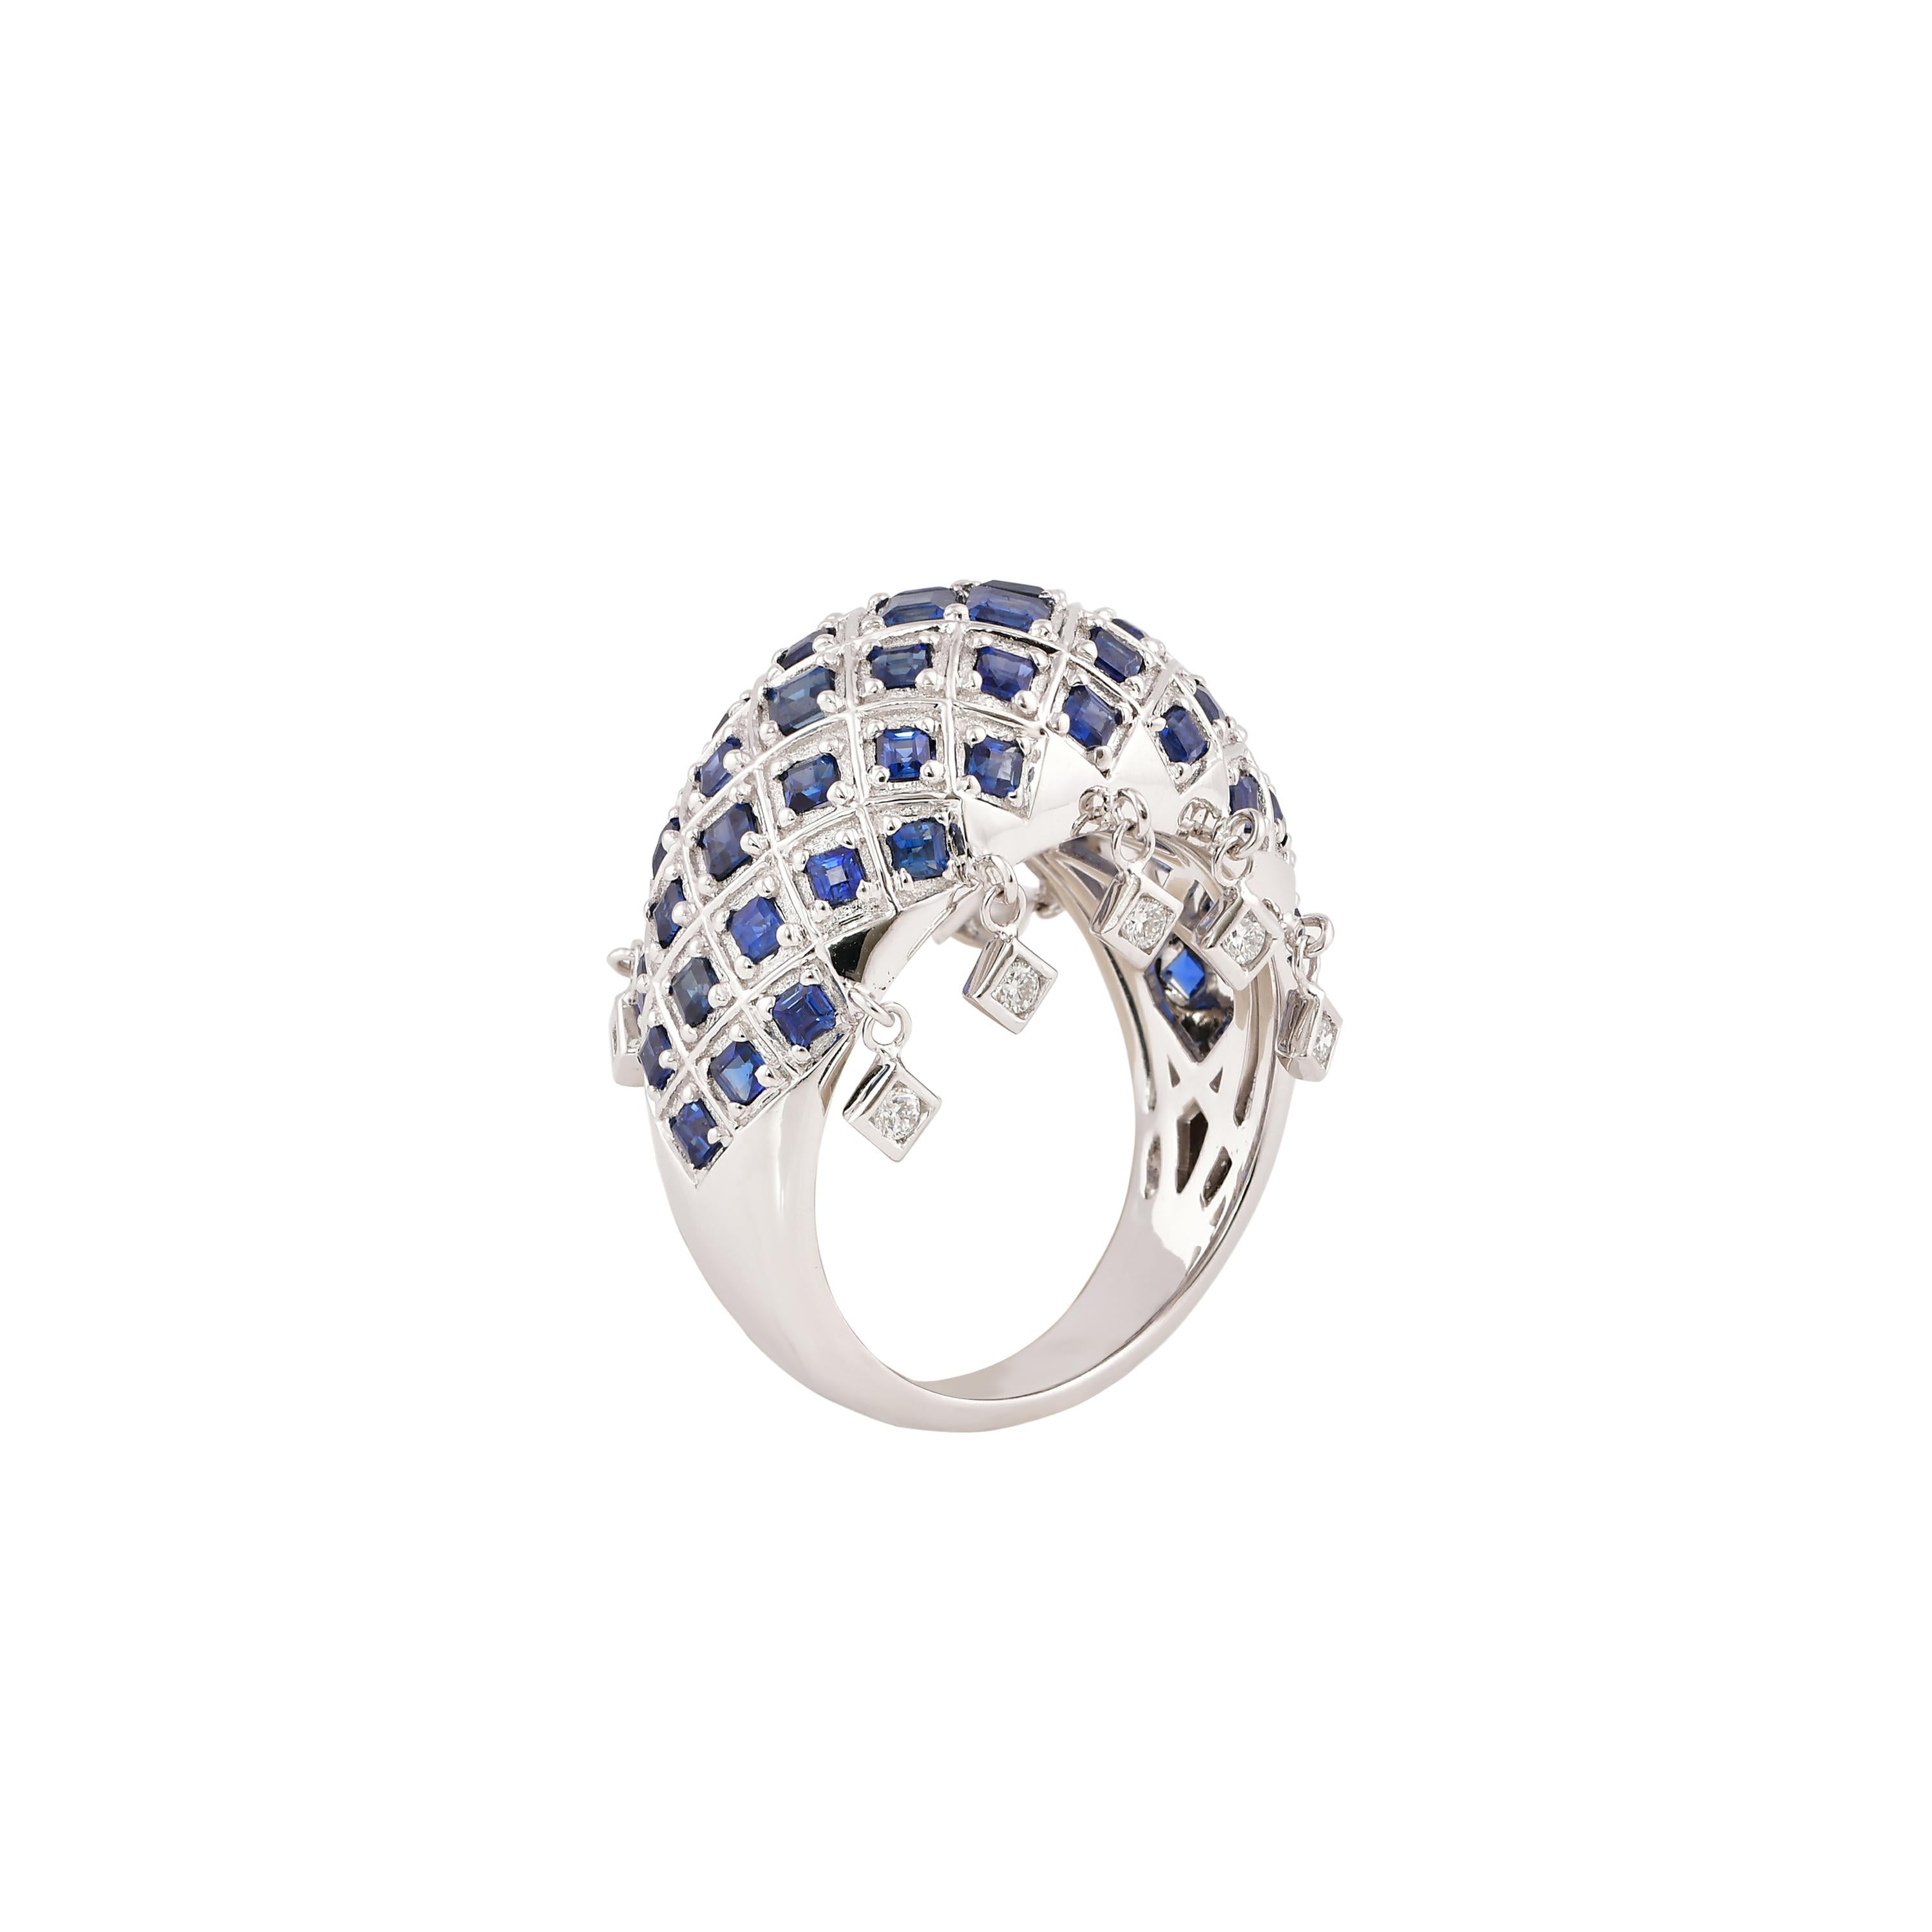 There is a reason why diamonds are a girl’s best friend, and it’s because there is never a wrong occasion to accessorize with diamond jewelry. This diamond collection showcases elegant pieces that are accented with blue sapphire and makes these